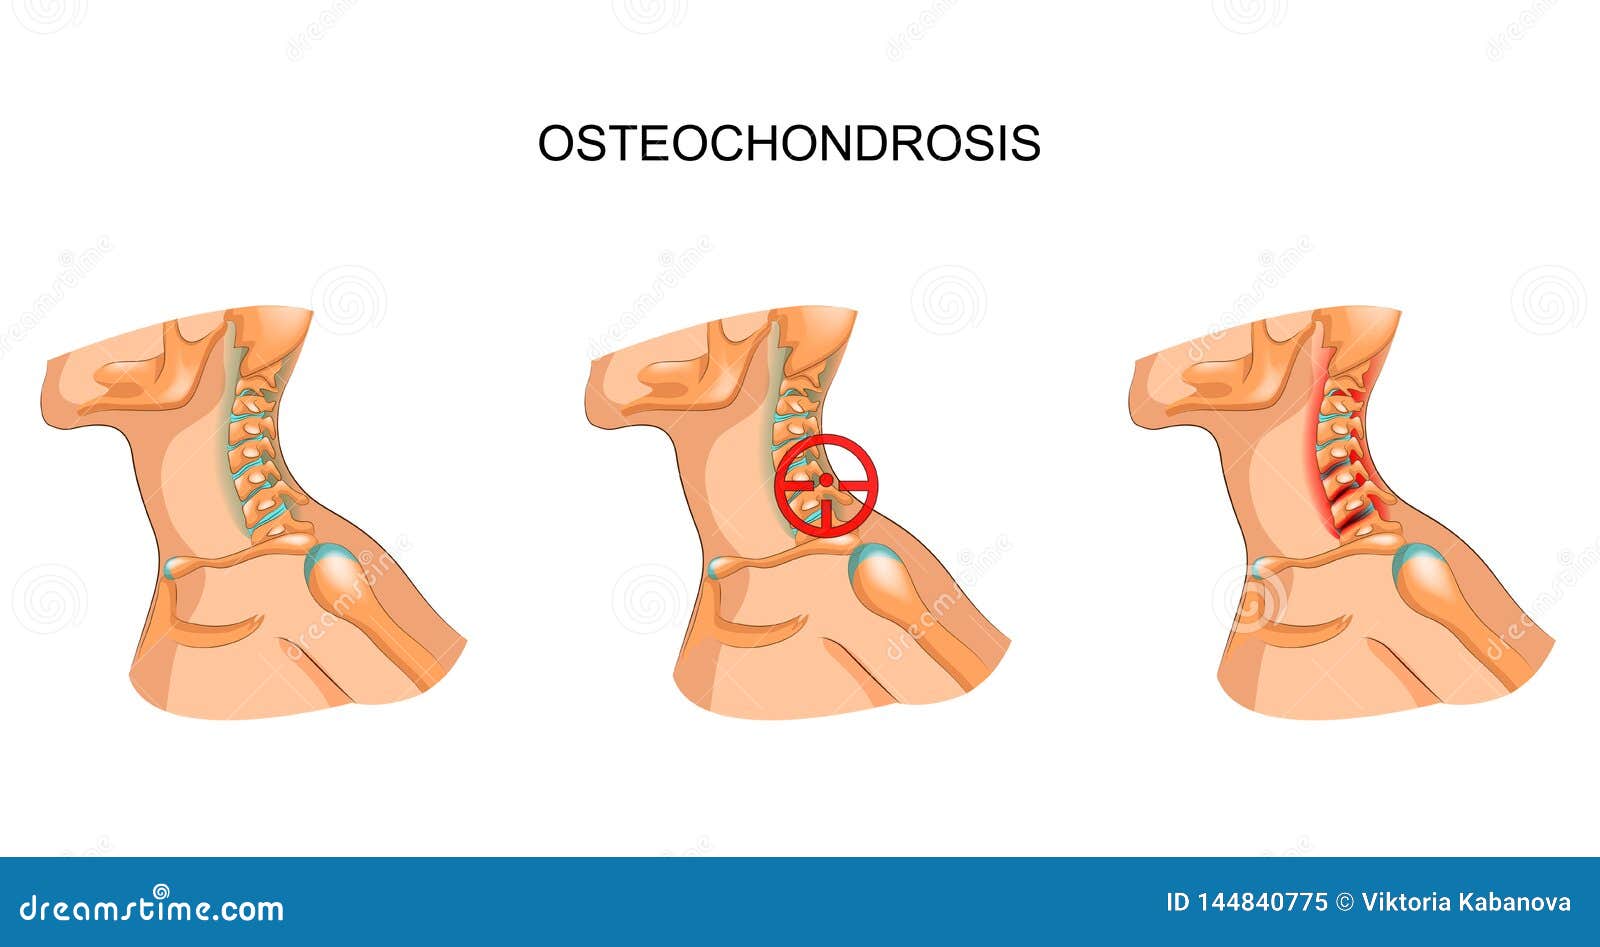 Osteochondrosis neck pain - Cervical osteochondrosis c5 6